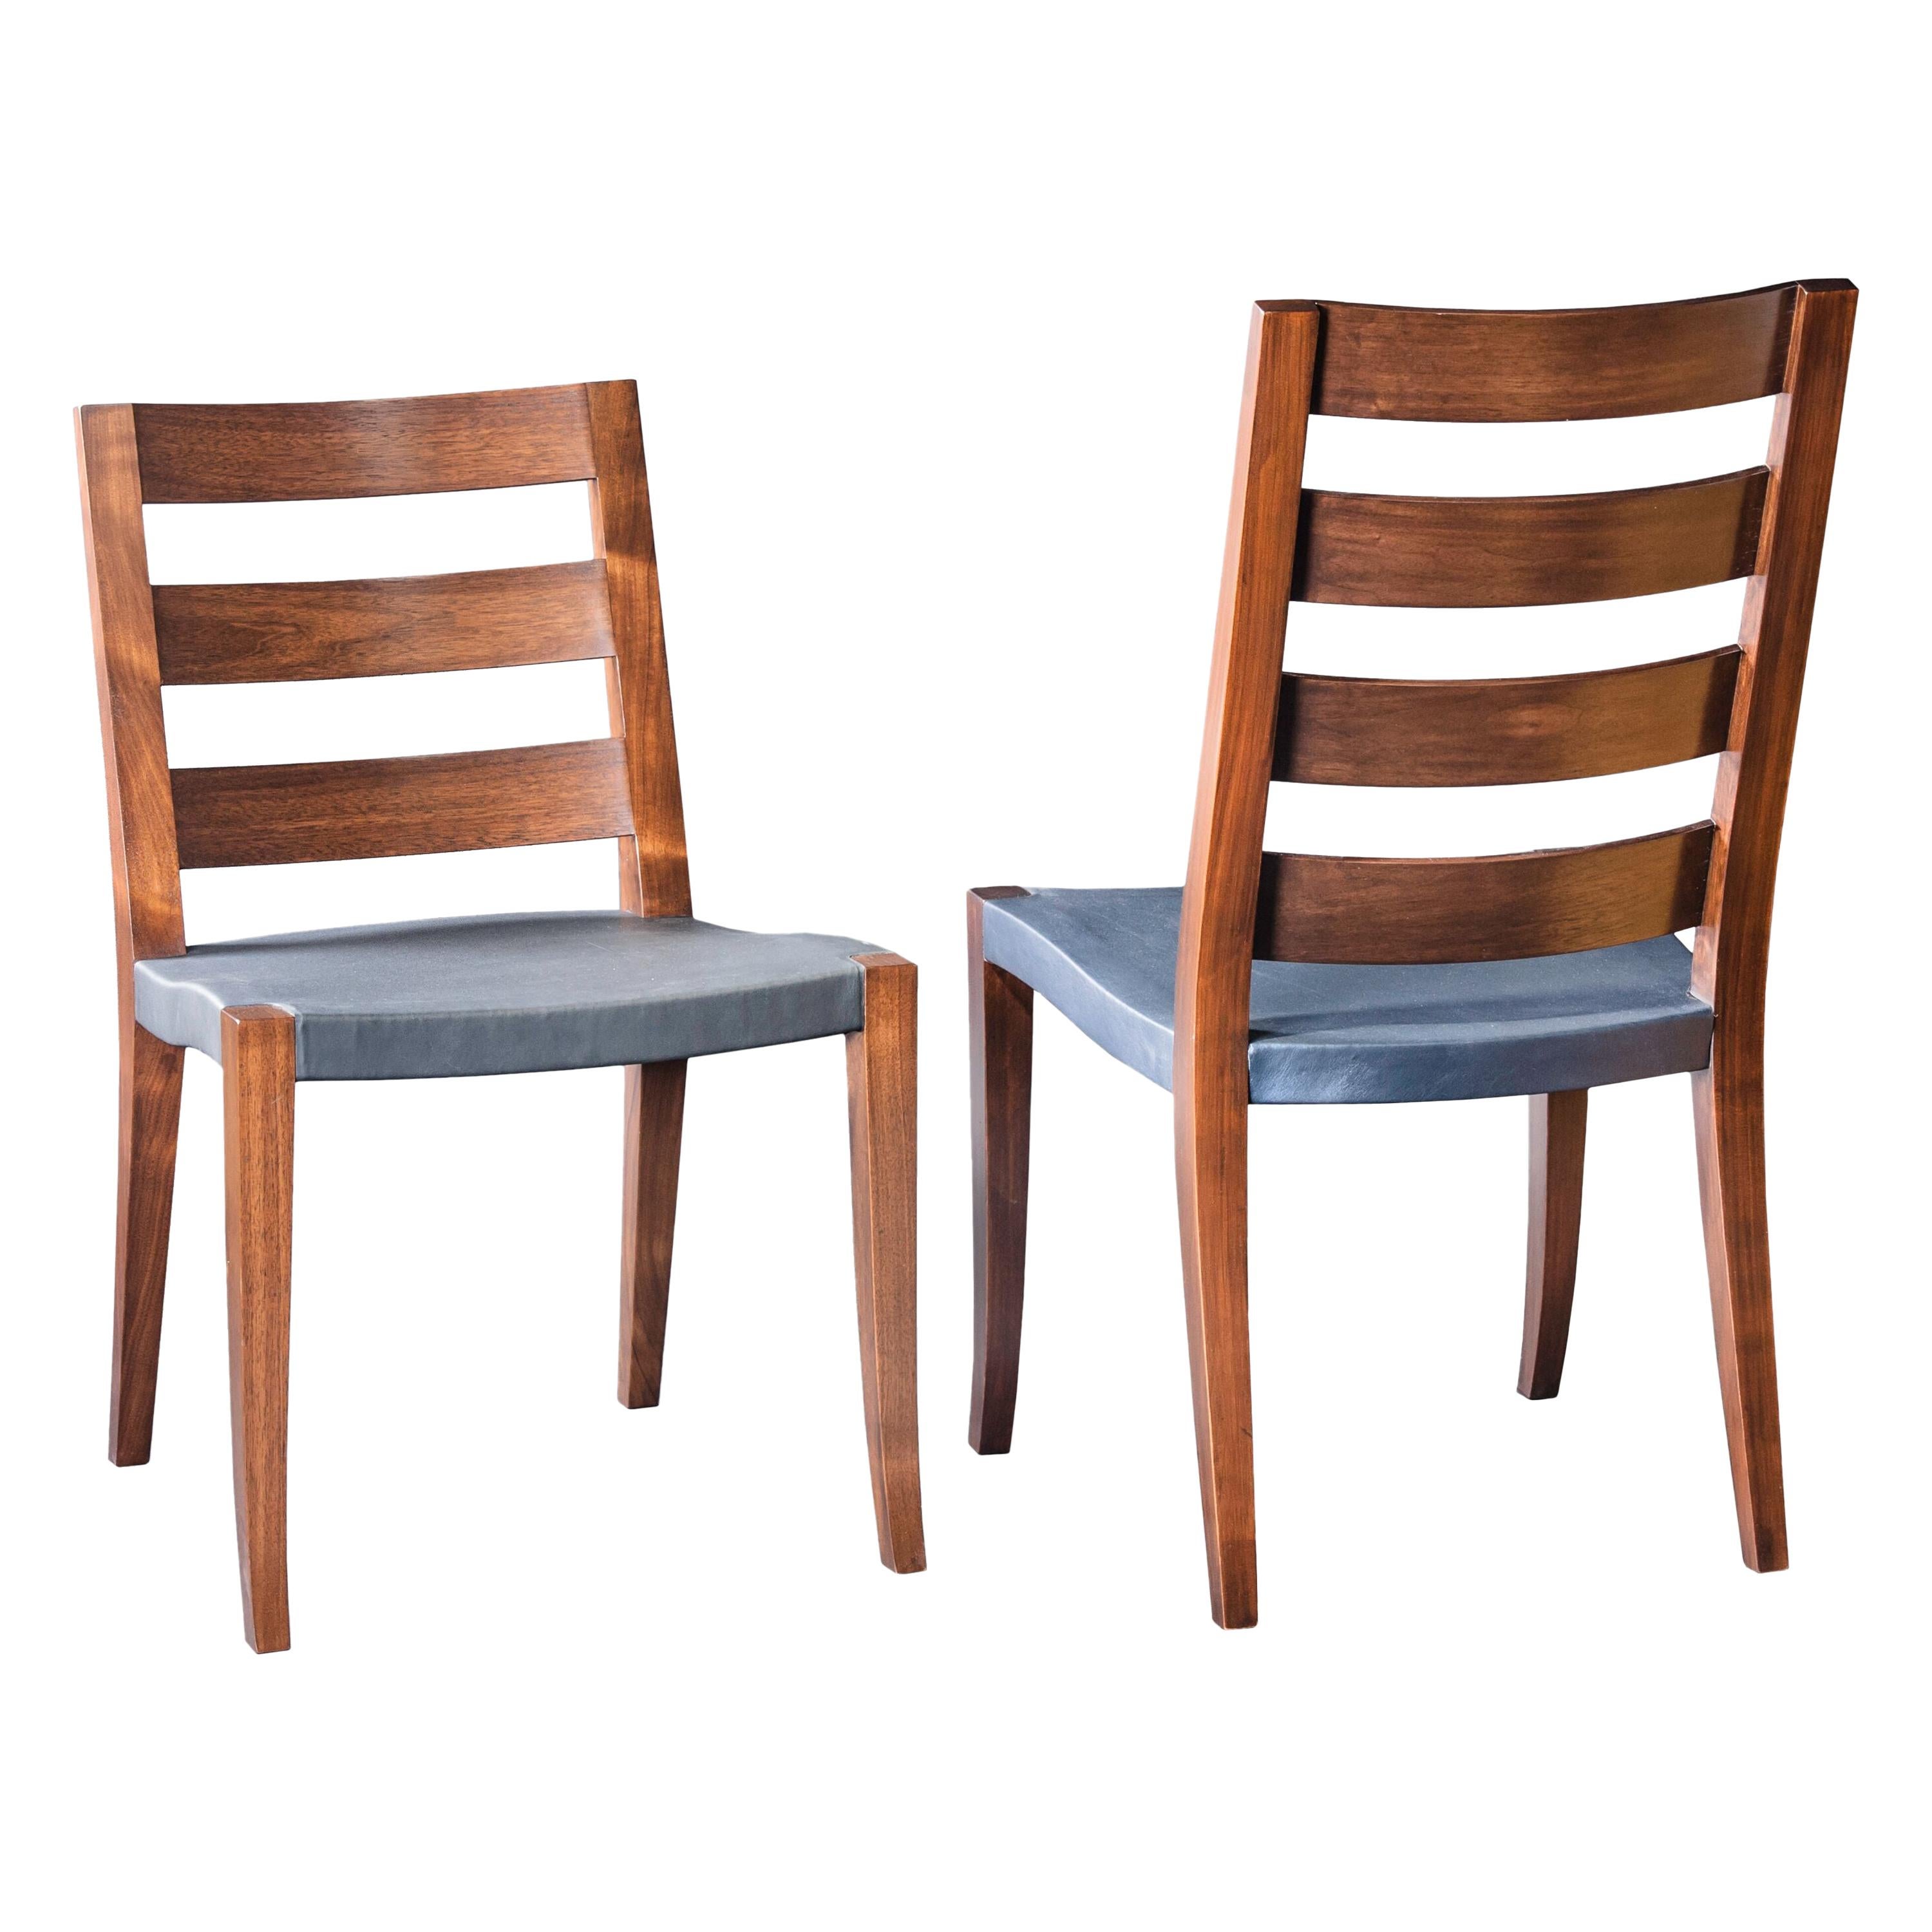 Walnut Low and High Slat Back Chairs with Slung Leather Seat